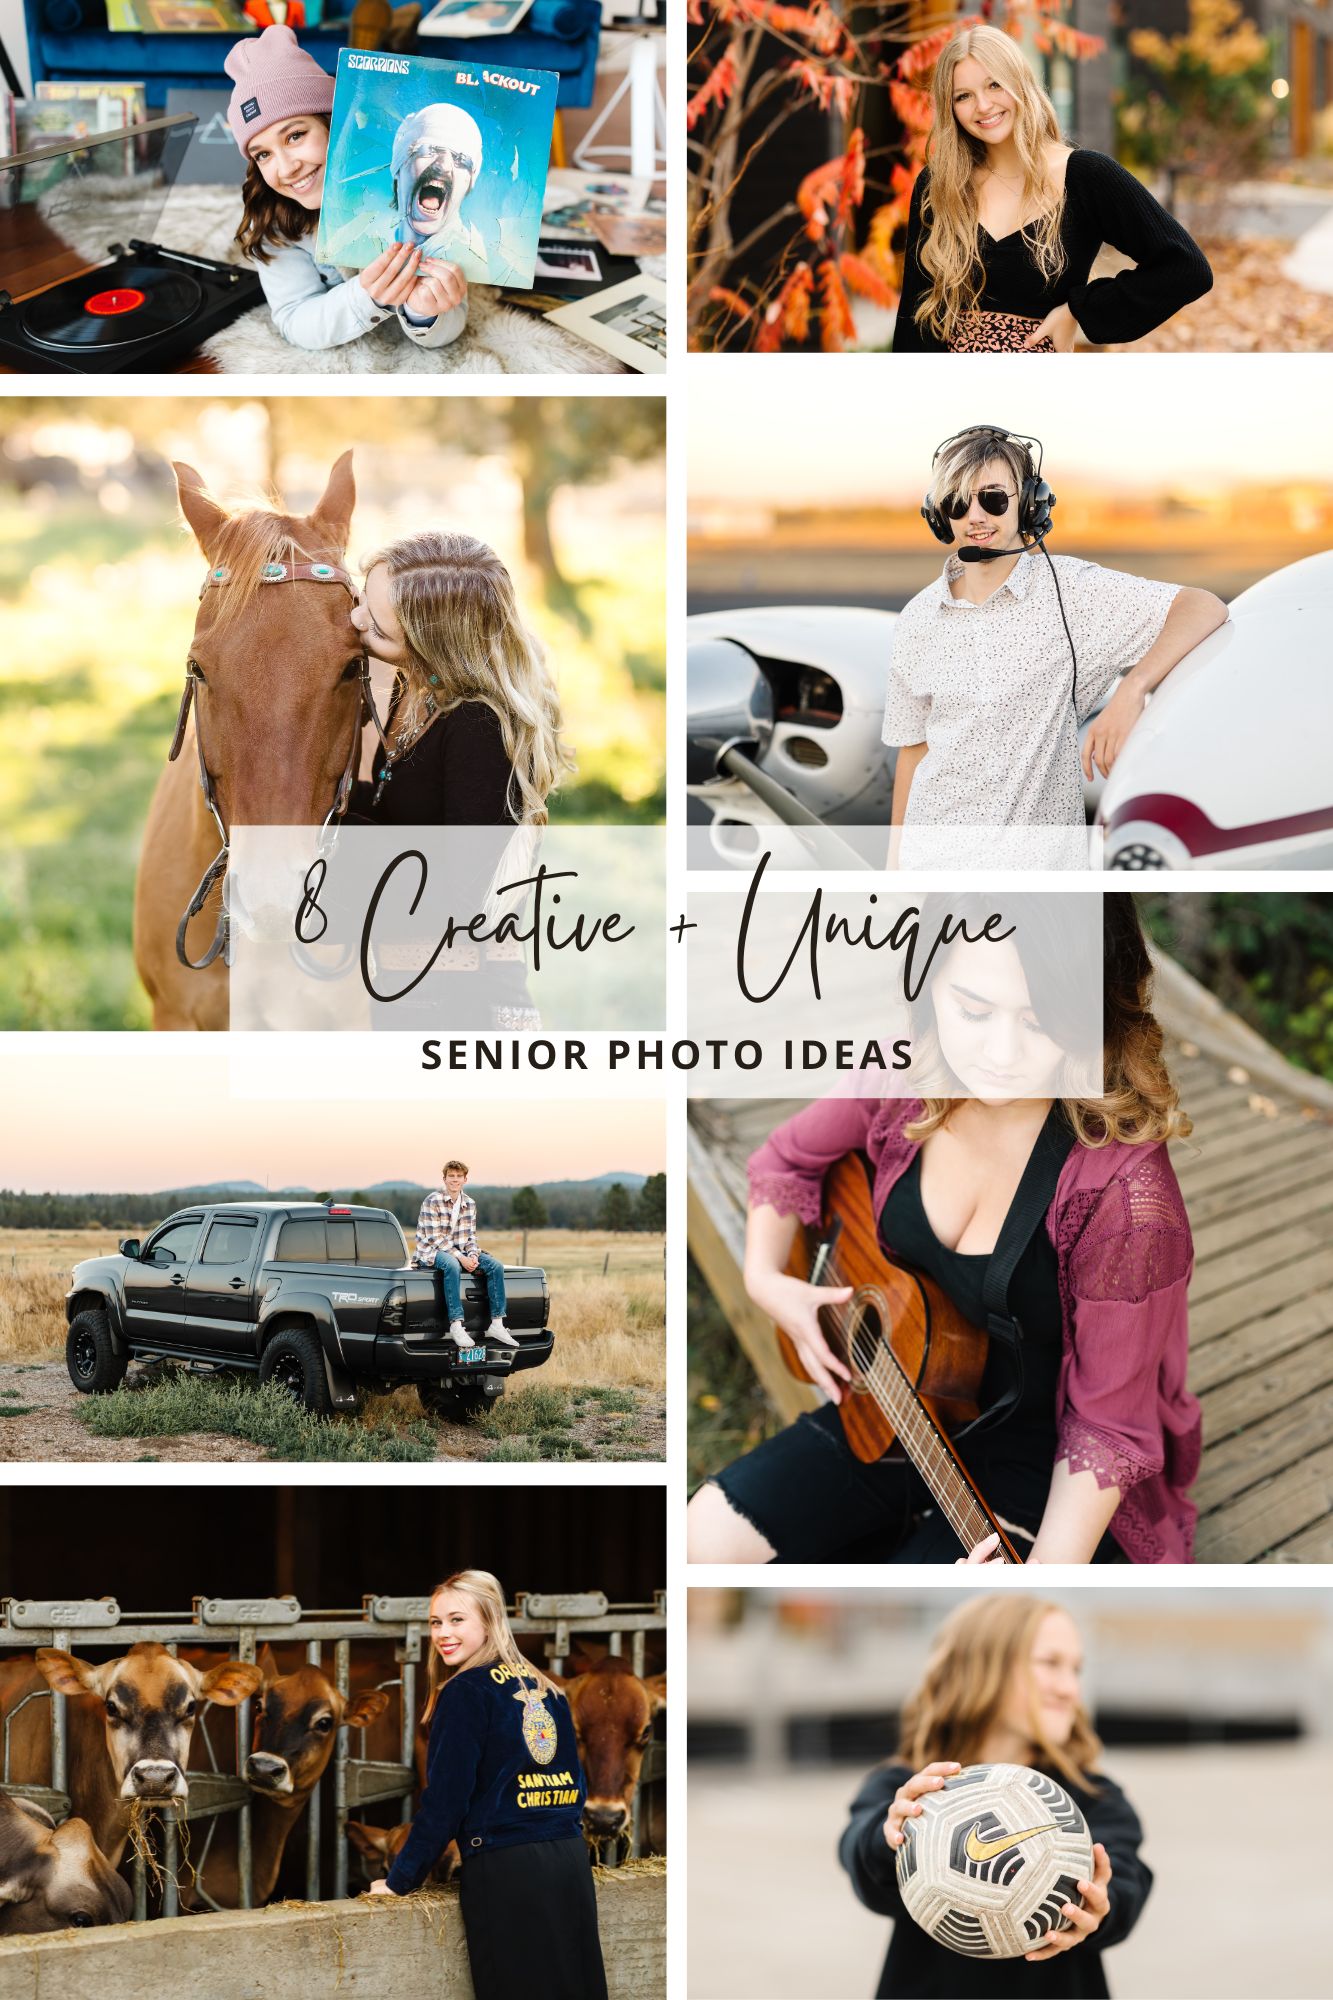 collage of8 images showing creative and unique senior photo ideas from bend senior photo sessions